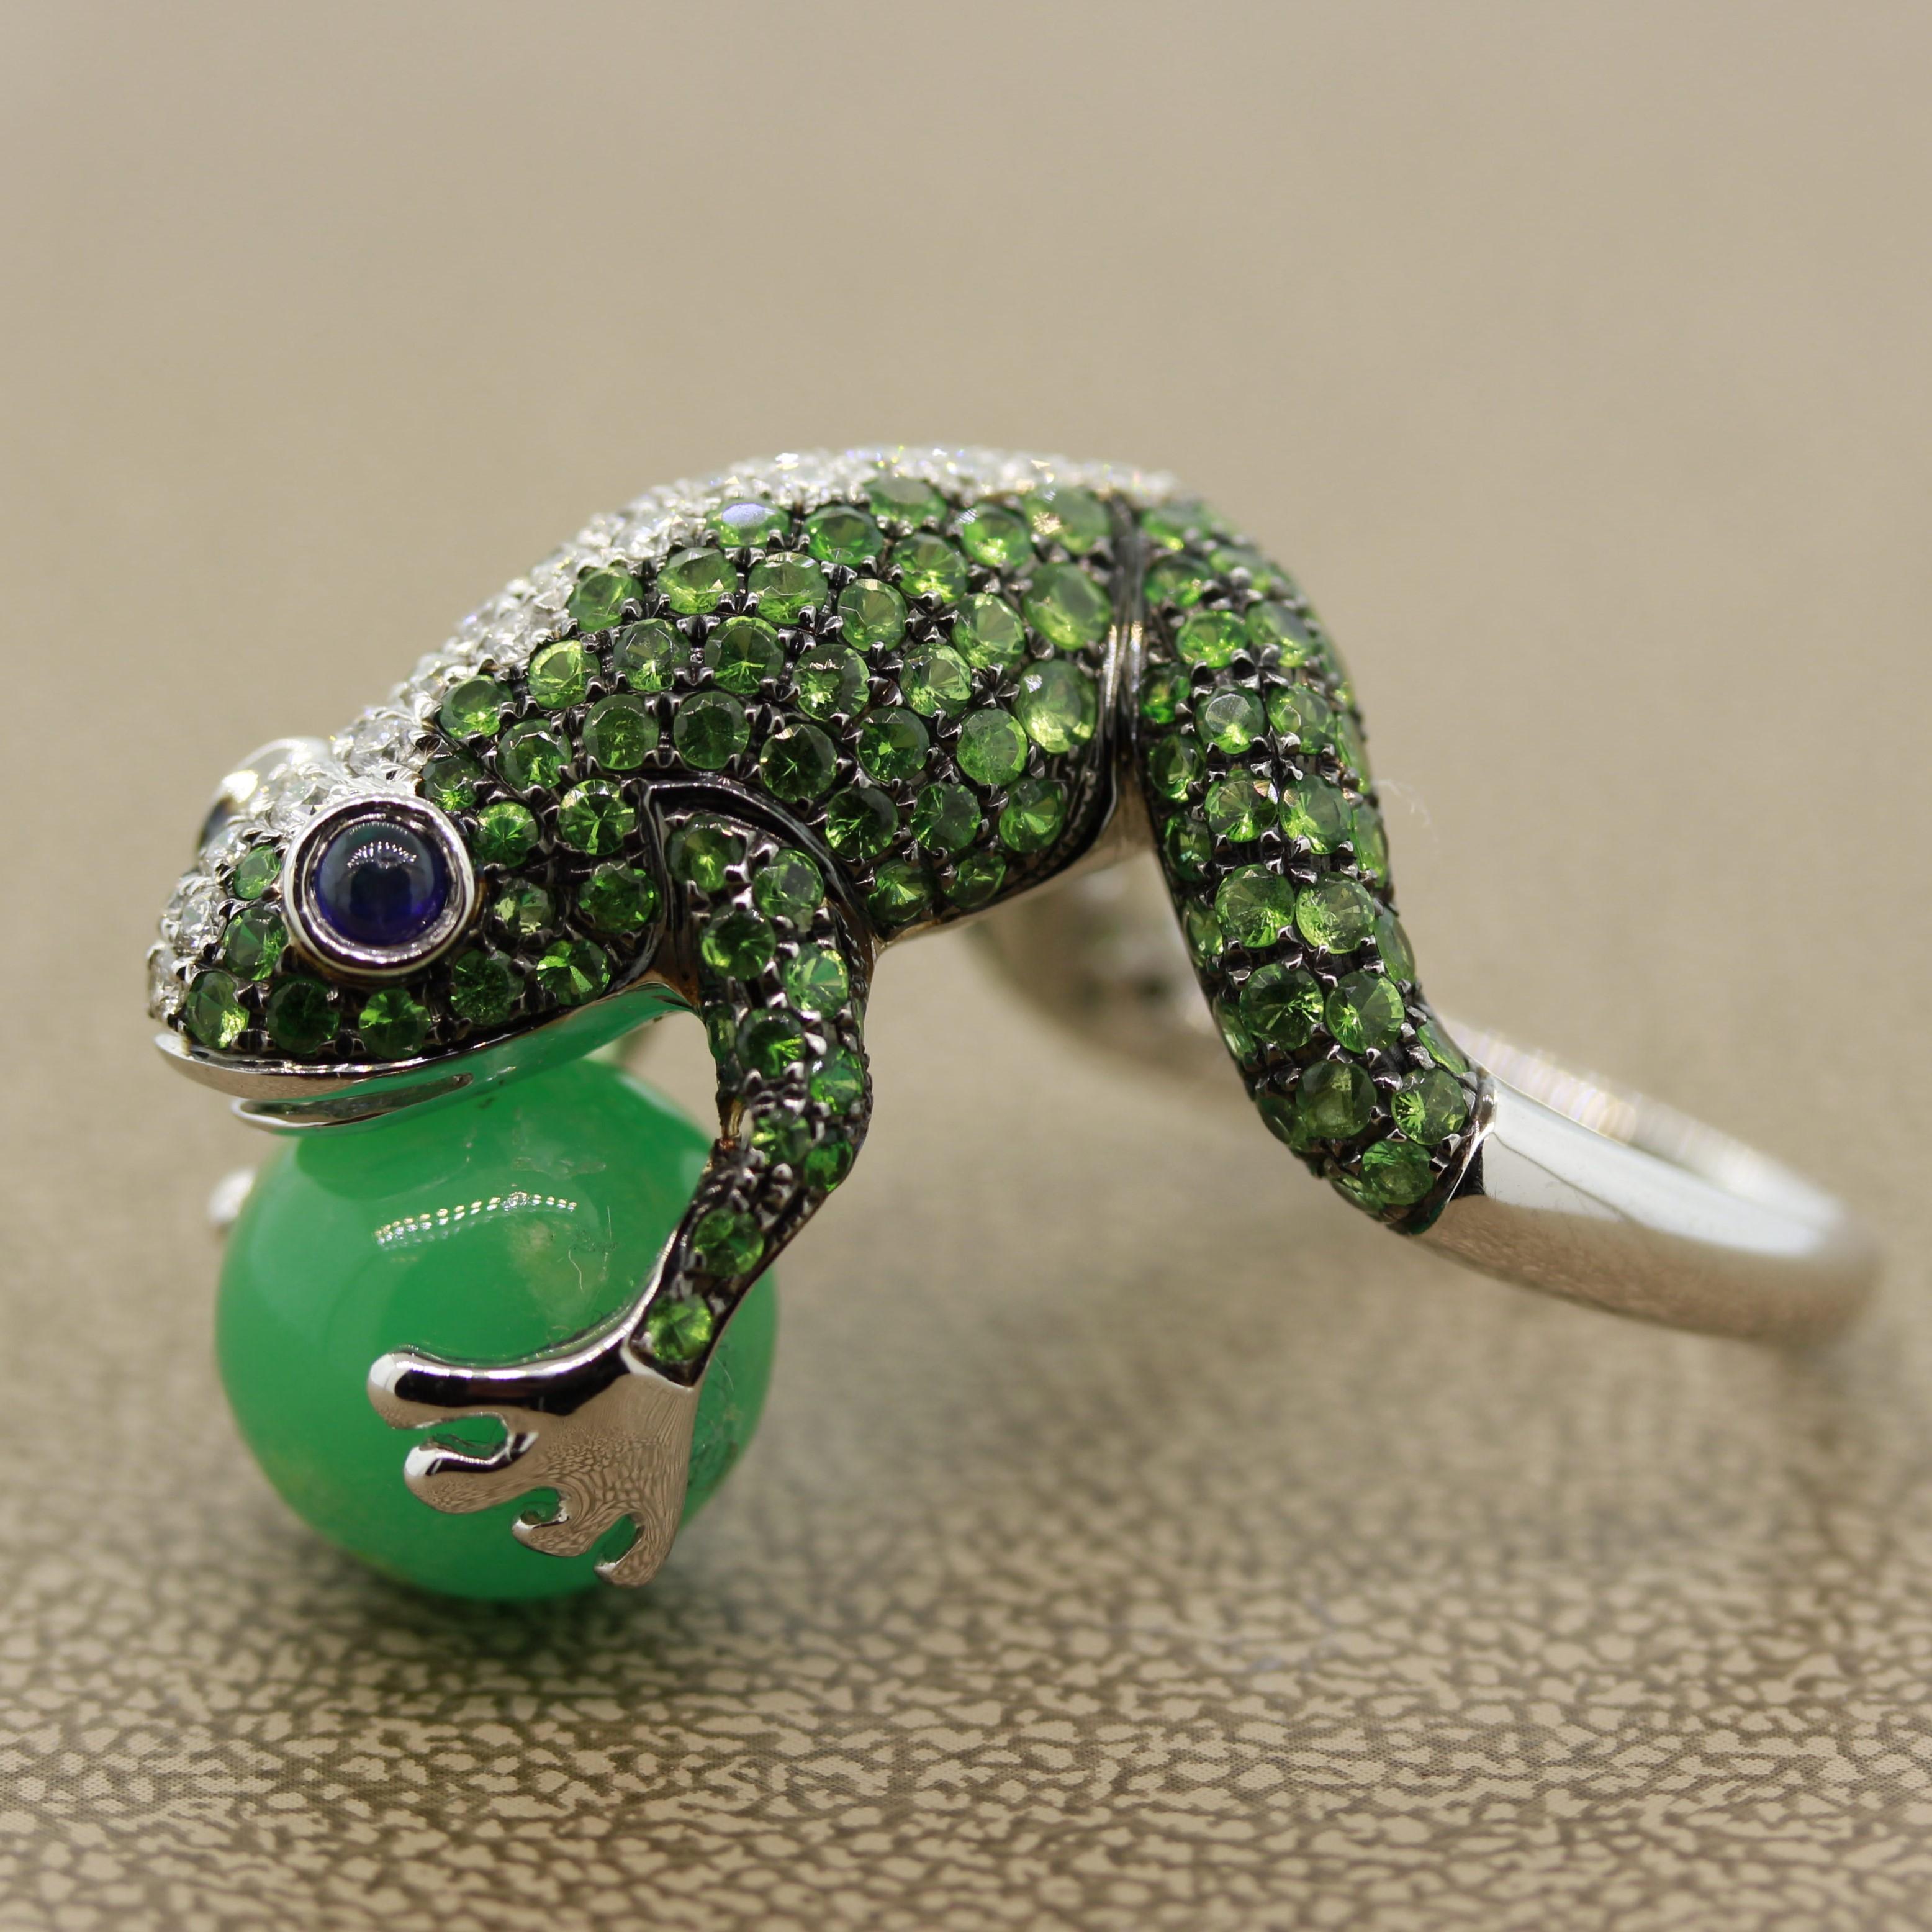 A whimsical and fine quality piece featuring 2.87 carats of round cut tsavorite, 0.35 carats of round brilliant cut diamonds and 2 blue sapphires as the frog’s eyes. It is holding a jade sphere in its hands and is made in 18k white gold.

Ring Size